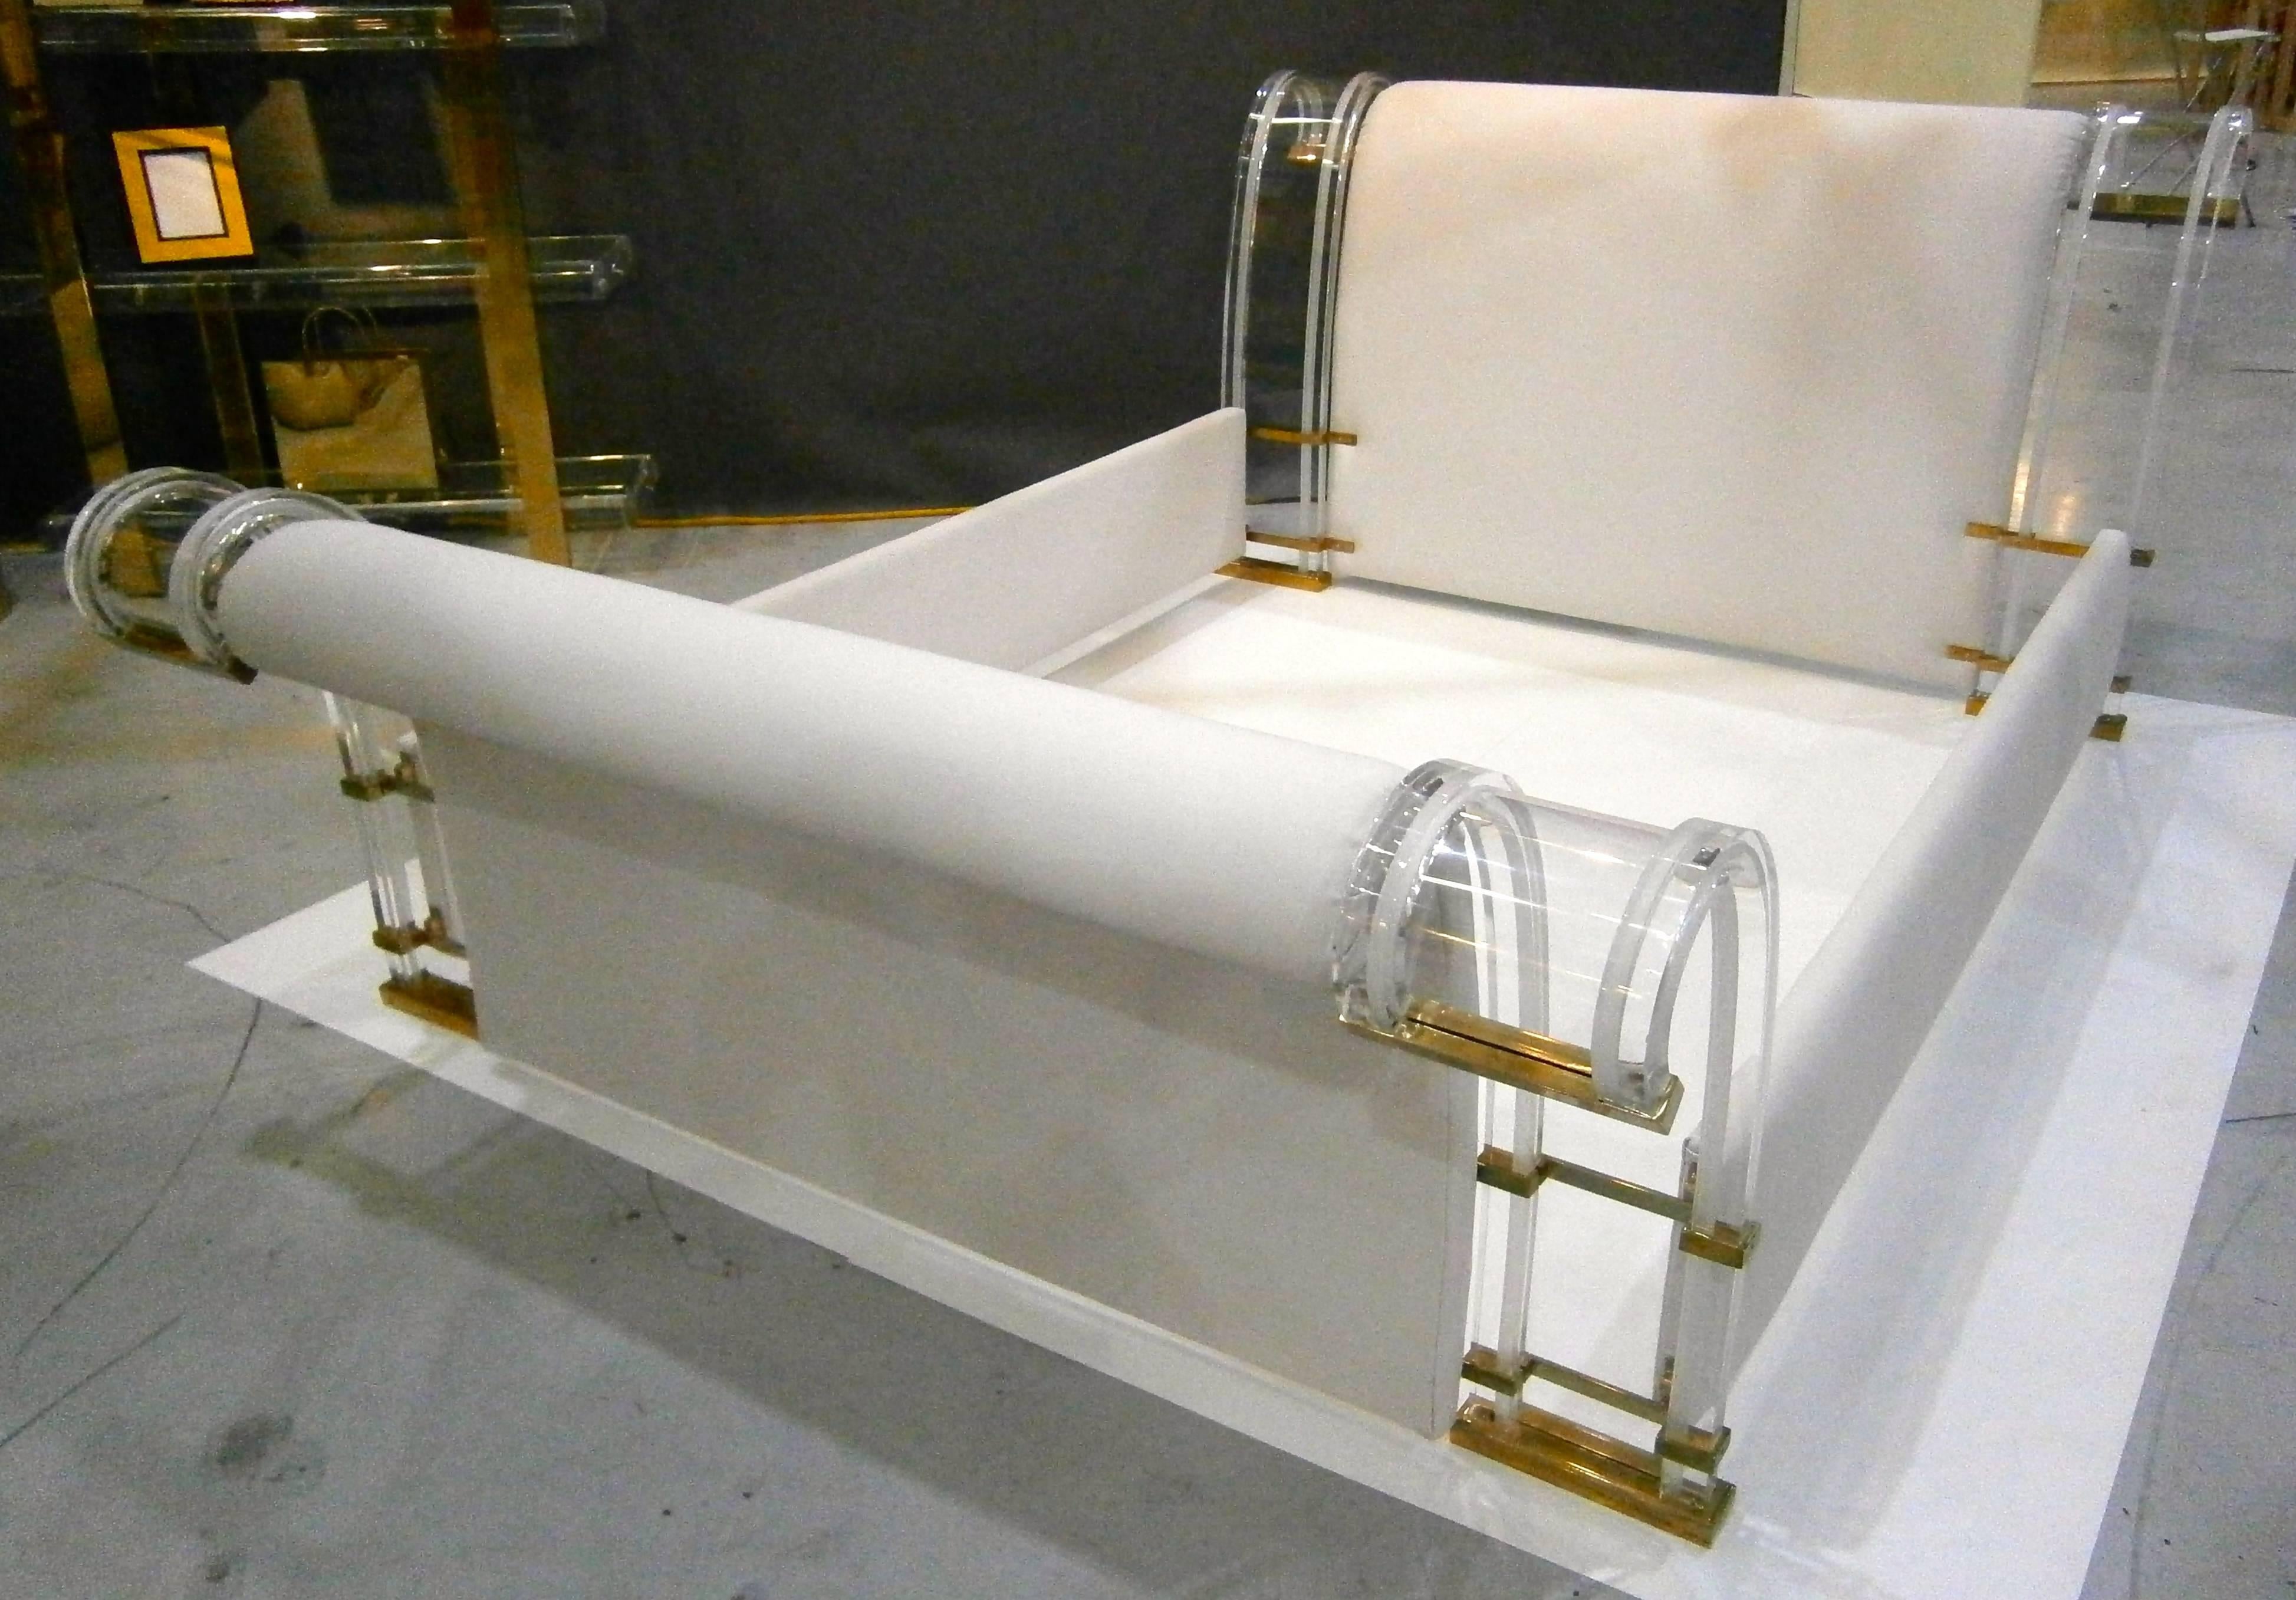 An amazing Lucite framed queen sized sleigh bed with solid brass fittings, attributed to Italian furniture designer Marcello Mioni. The bent Lucite pieces that frame the headboard and footboard have a frosted line detail that accentuates the